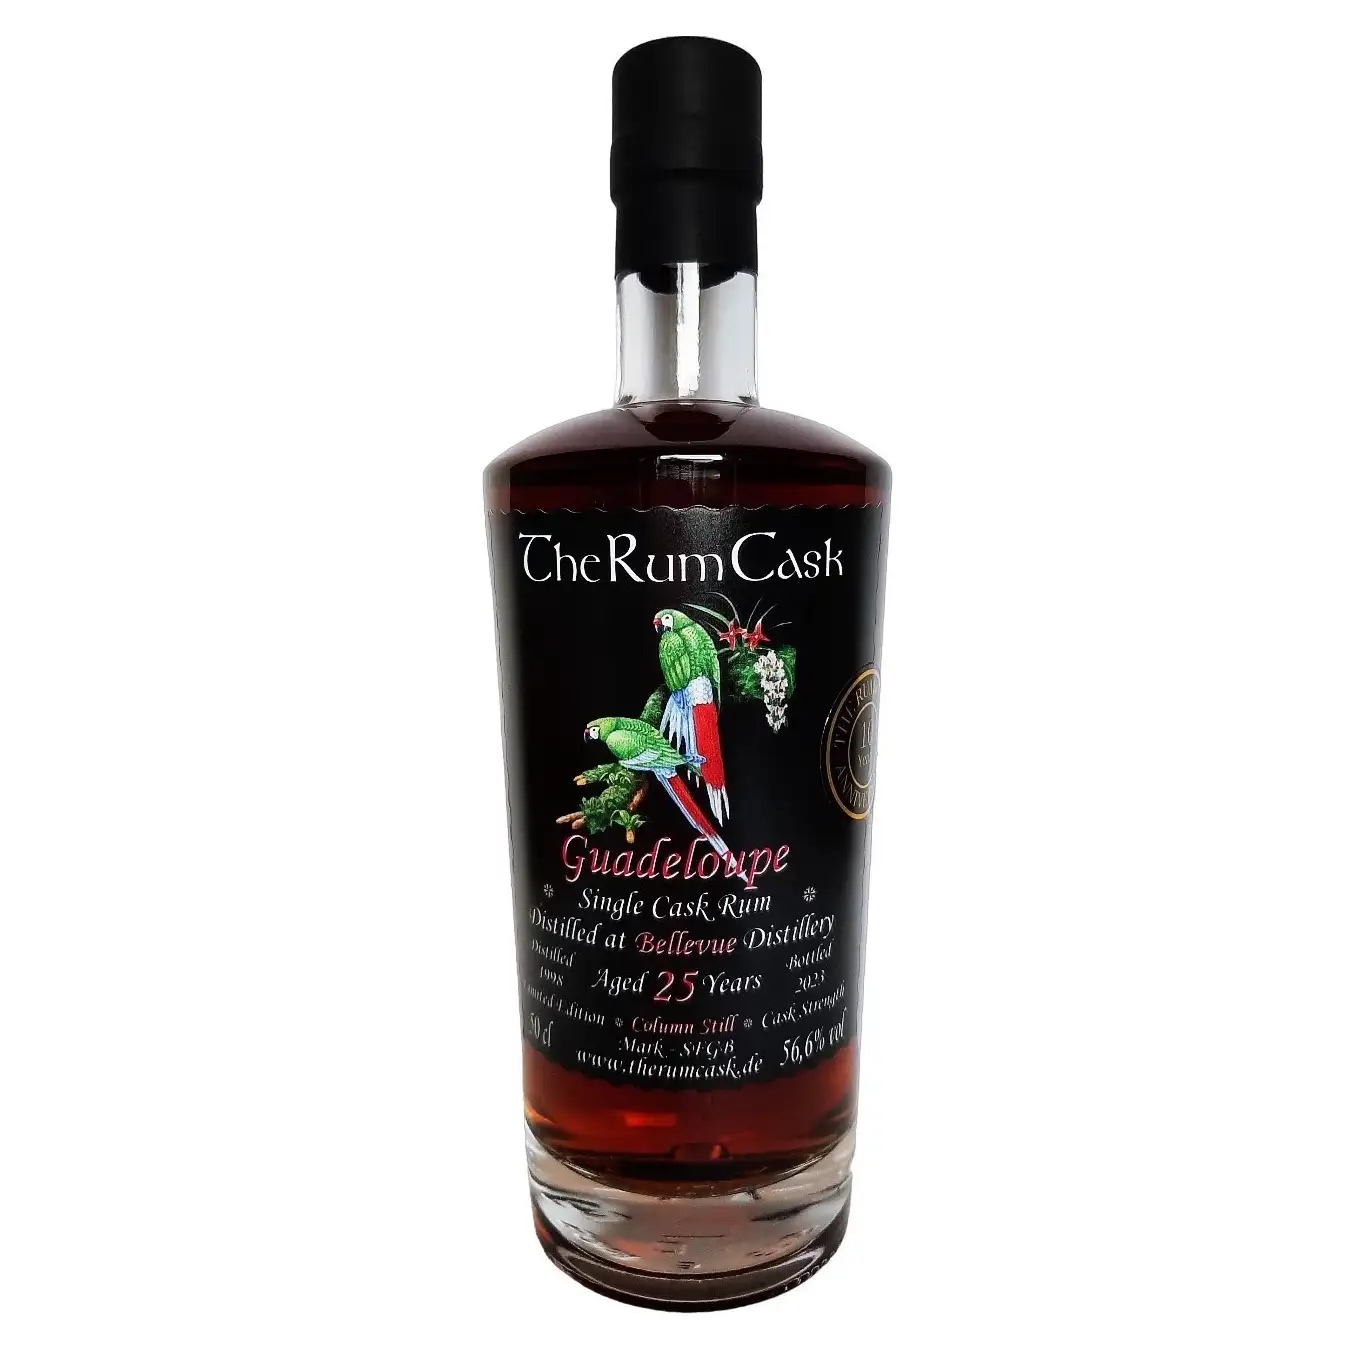 Image of the front of the bottle of the rum Guadeloupe SFGB